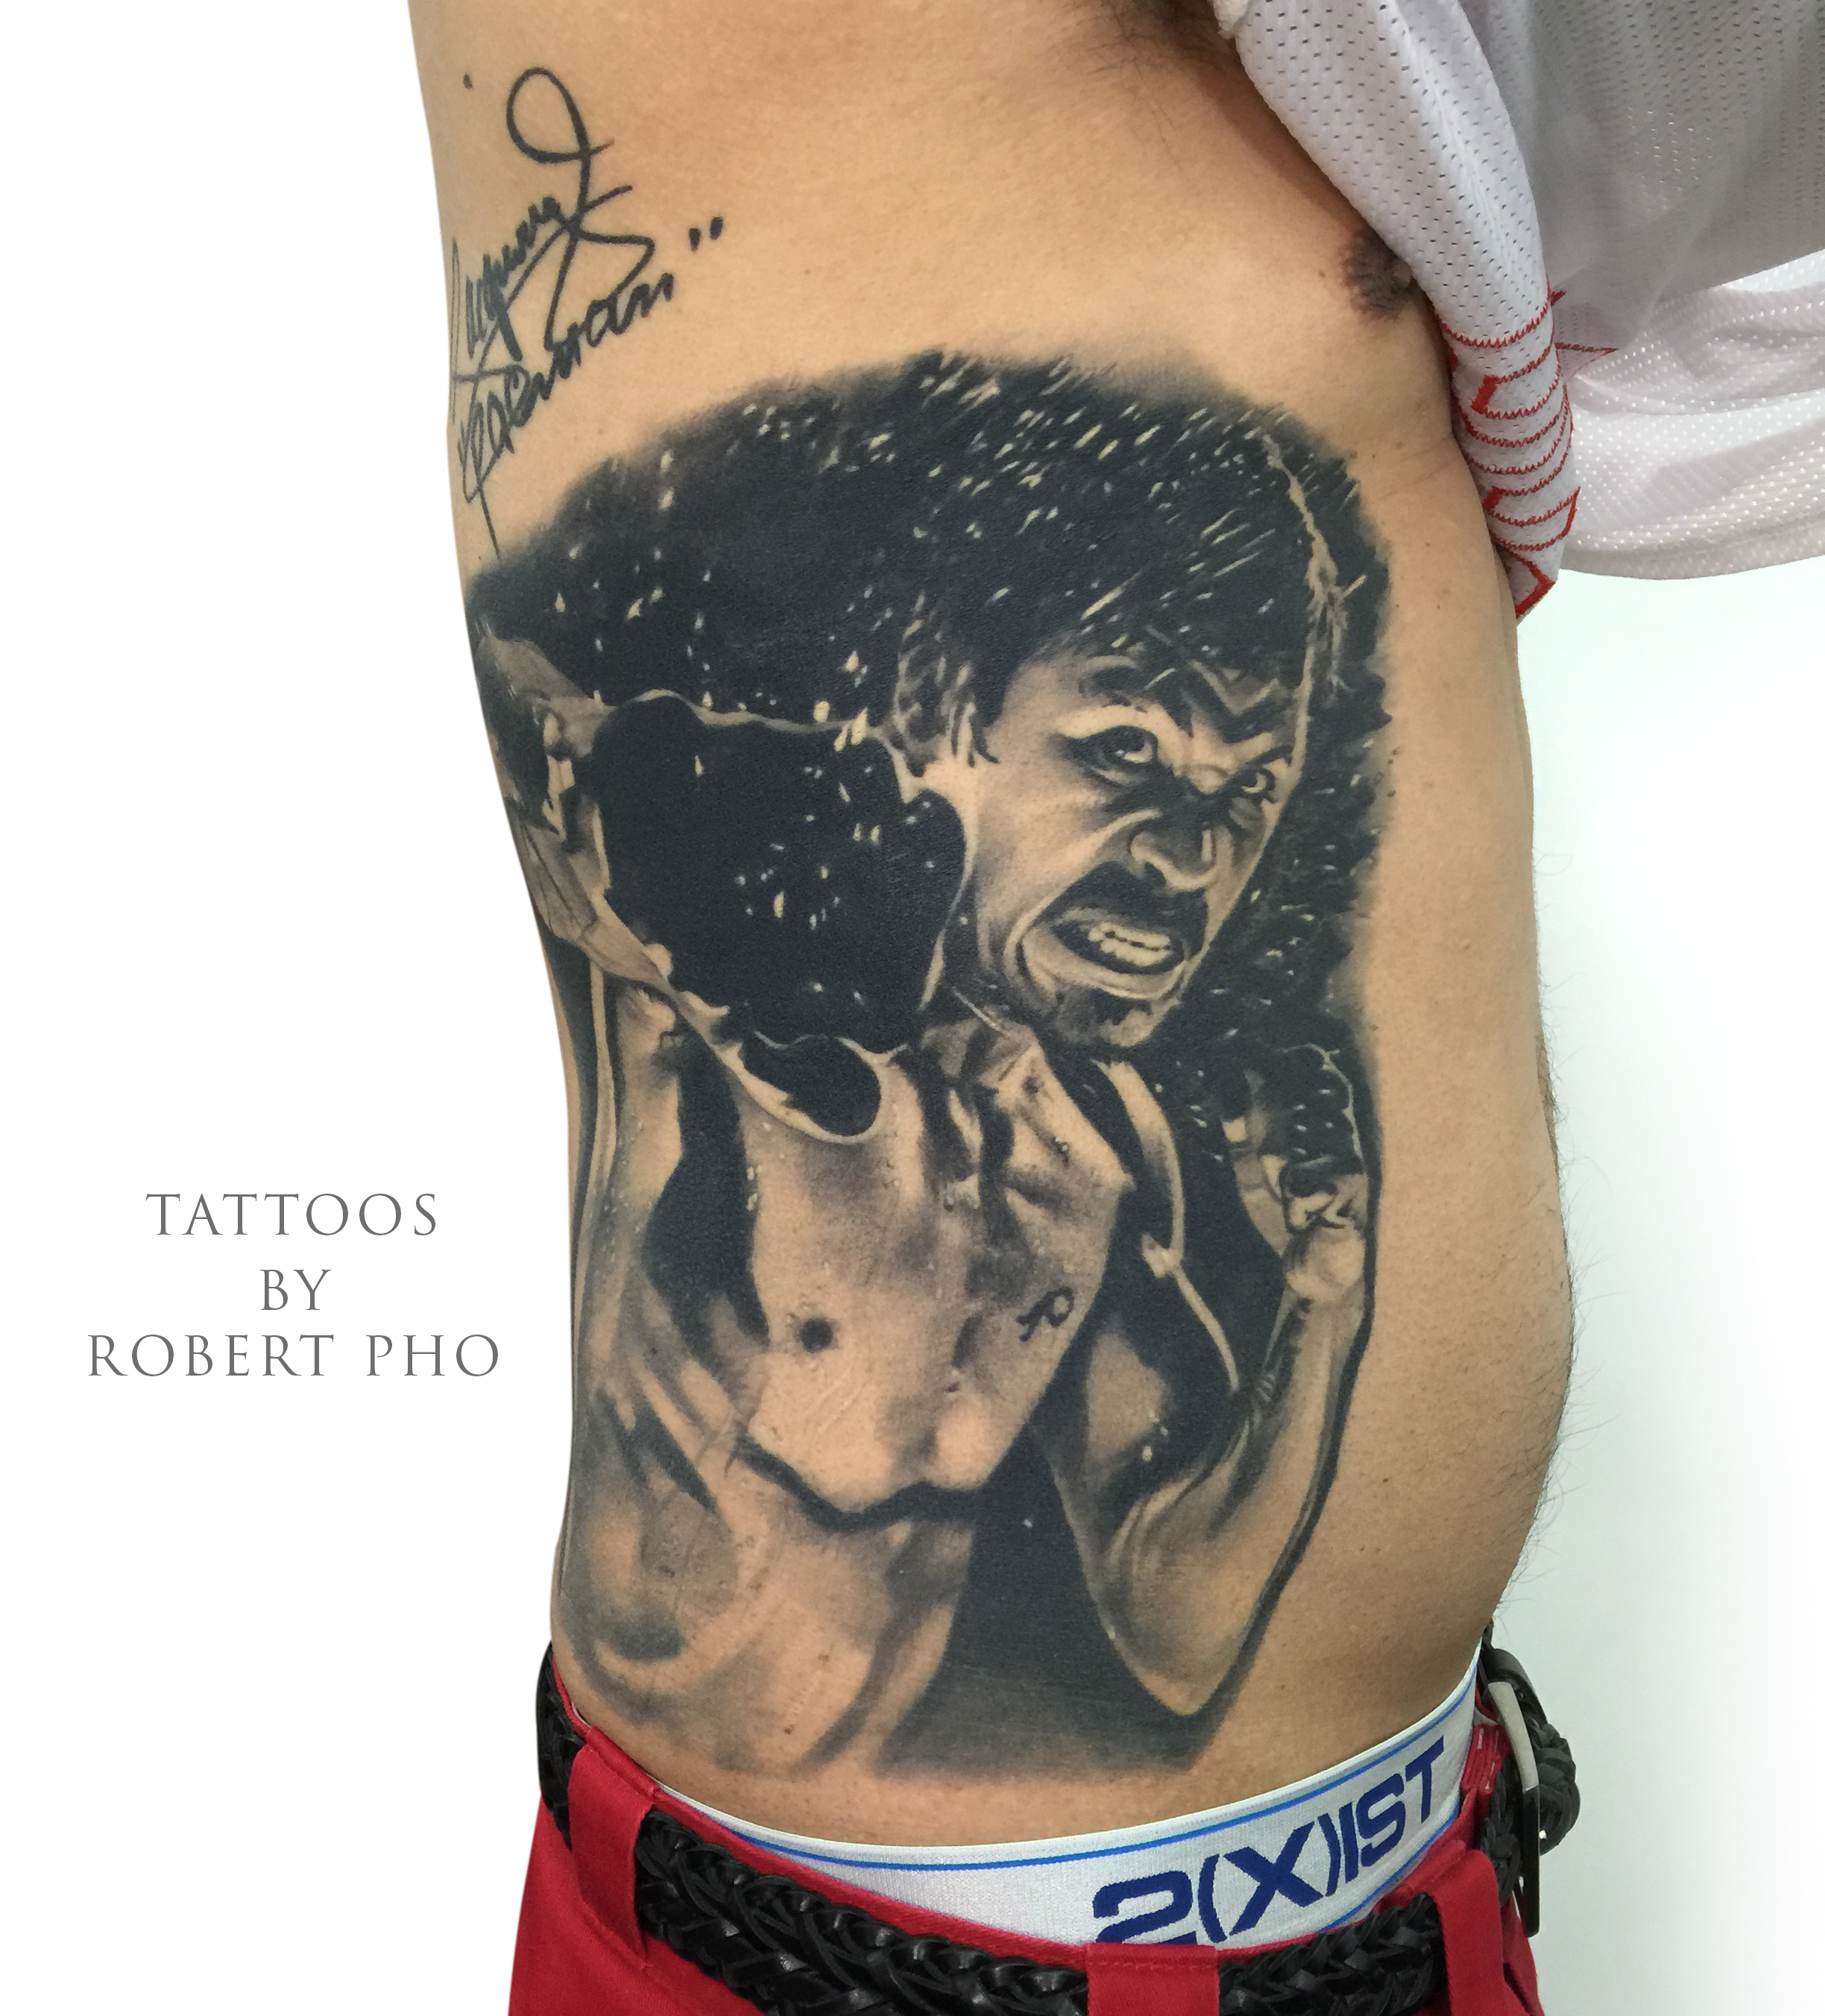 Does man who tattooed Manny Pacquiao on his stomach regret his decision  after the loss? | Newswire